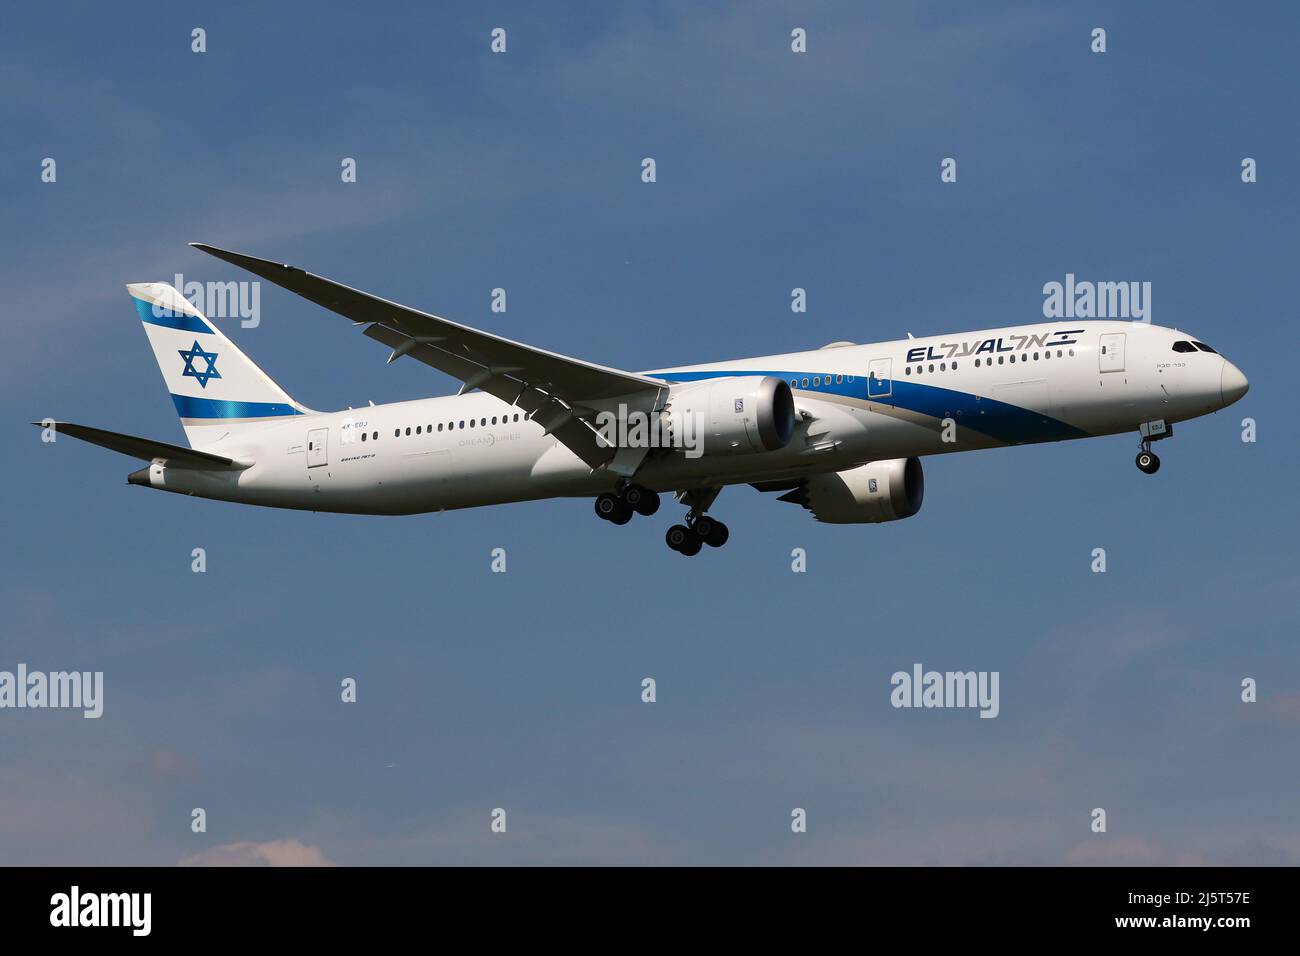 A Boeing 787 operated by El Al Israel arrives at London Heathrow Airport Stock Photo